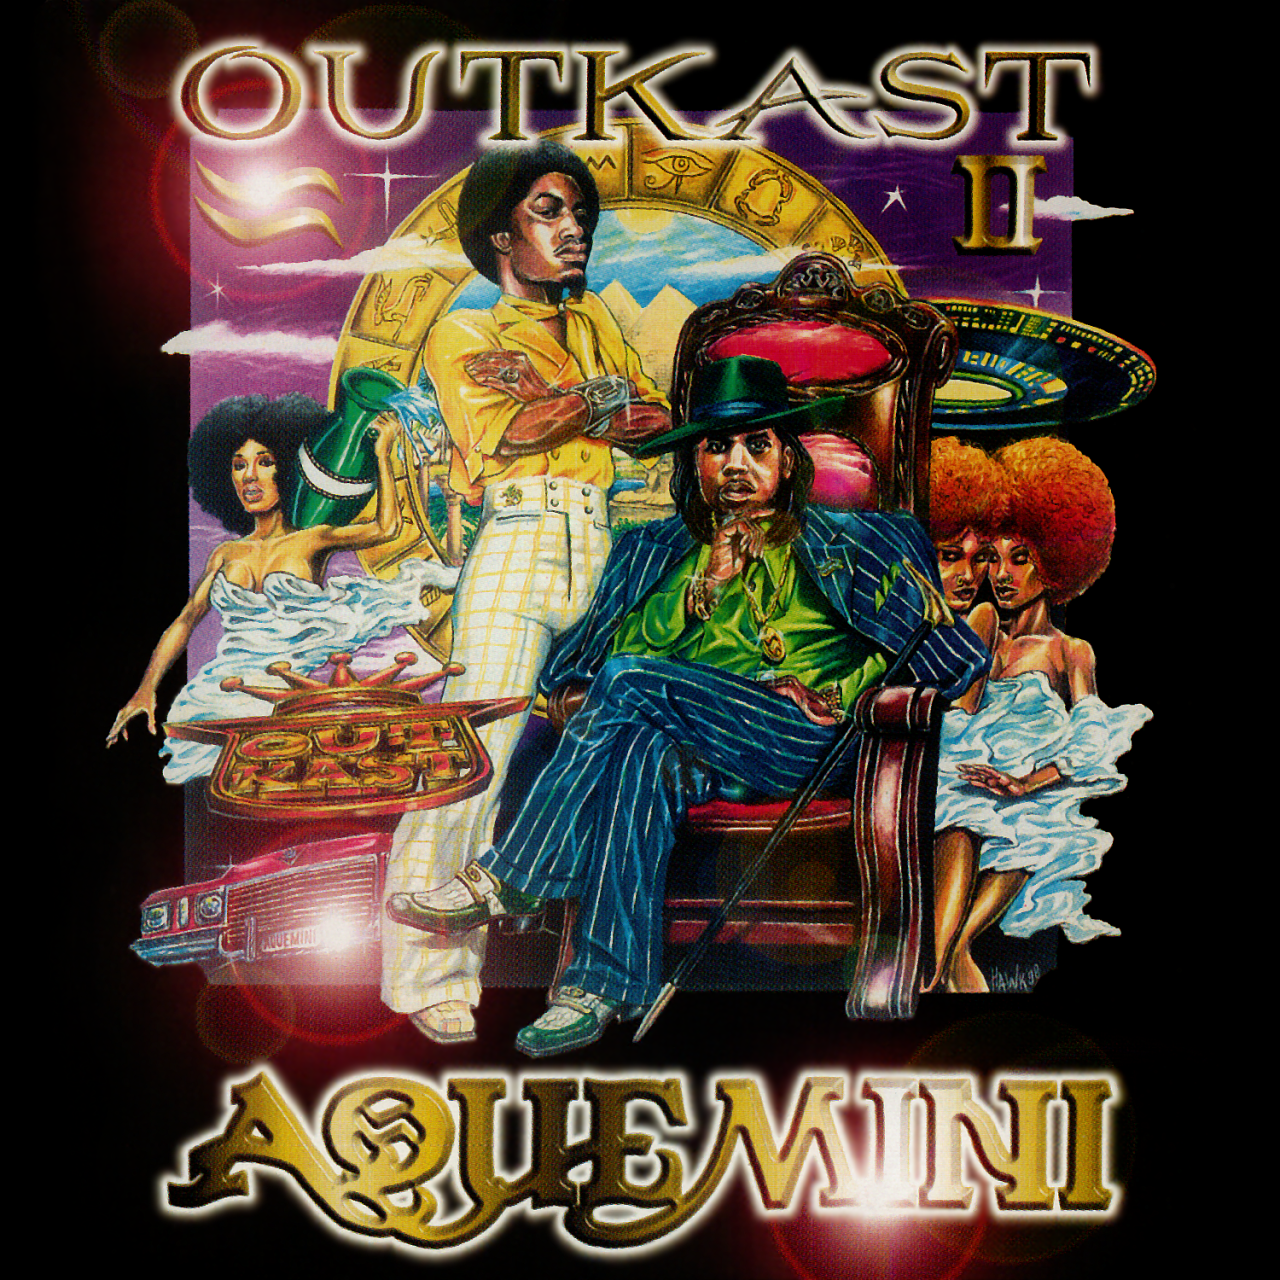 BACK IN THE DAY |9/29/98| Outkast released their third album, Aquemini, on LaFace